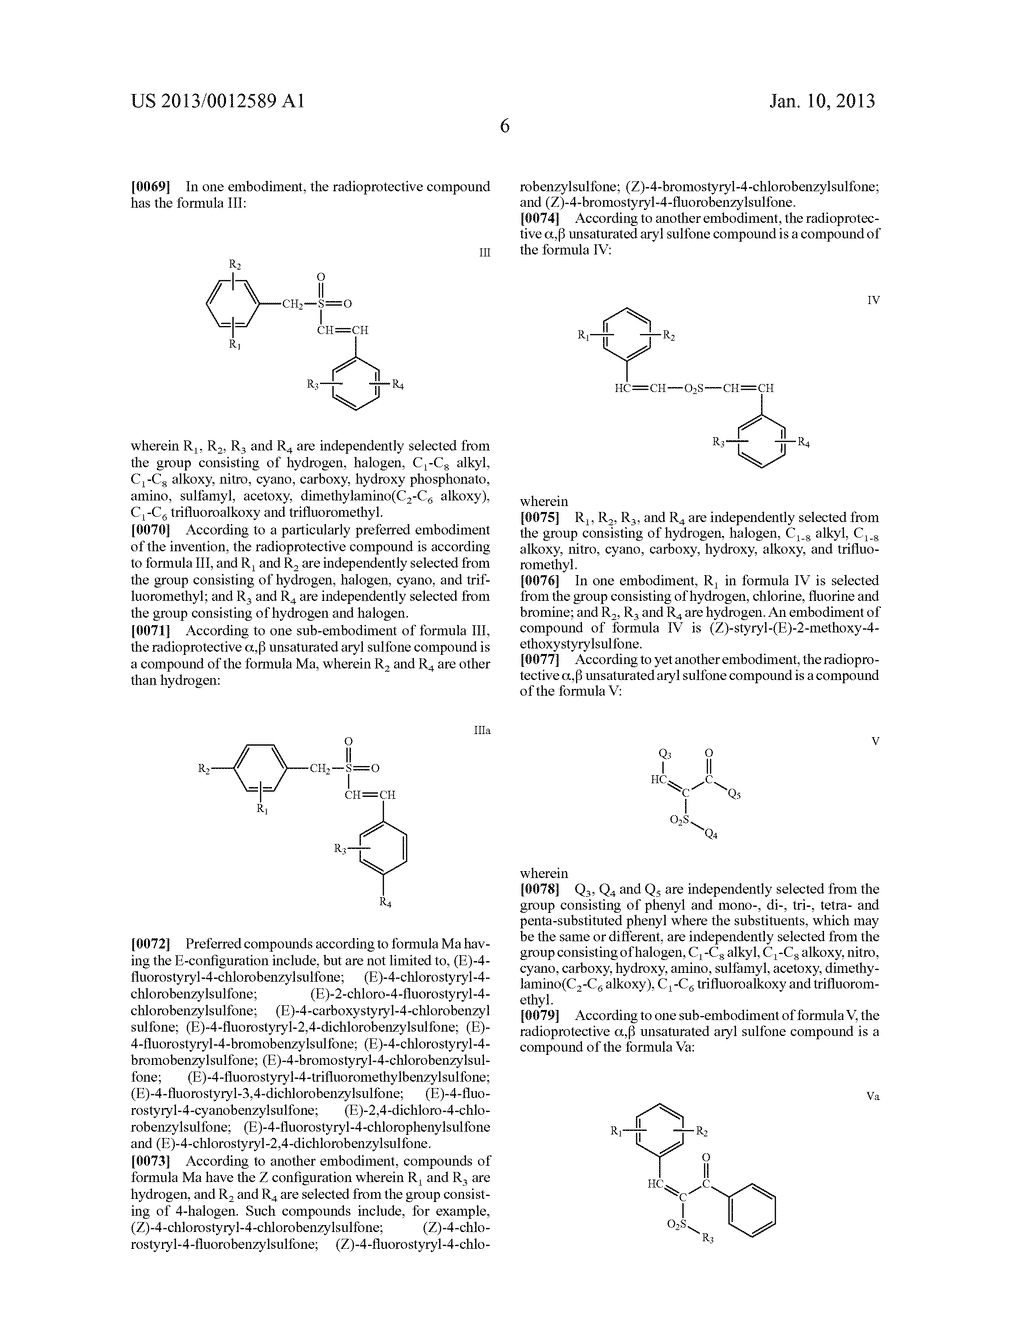 STABLE AQUEOUS FORMULATION OF (E)-4-CARBOXYSTYRYL-4-CHLOROBENZYL SULFONE - diagram, schematic, and image 15